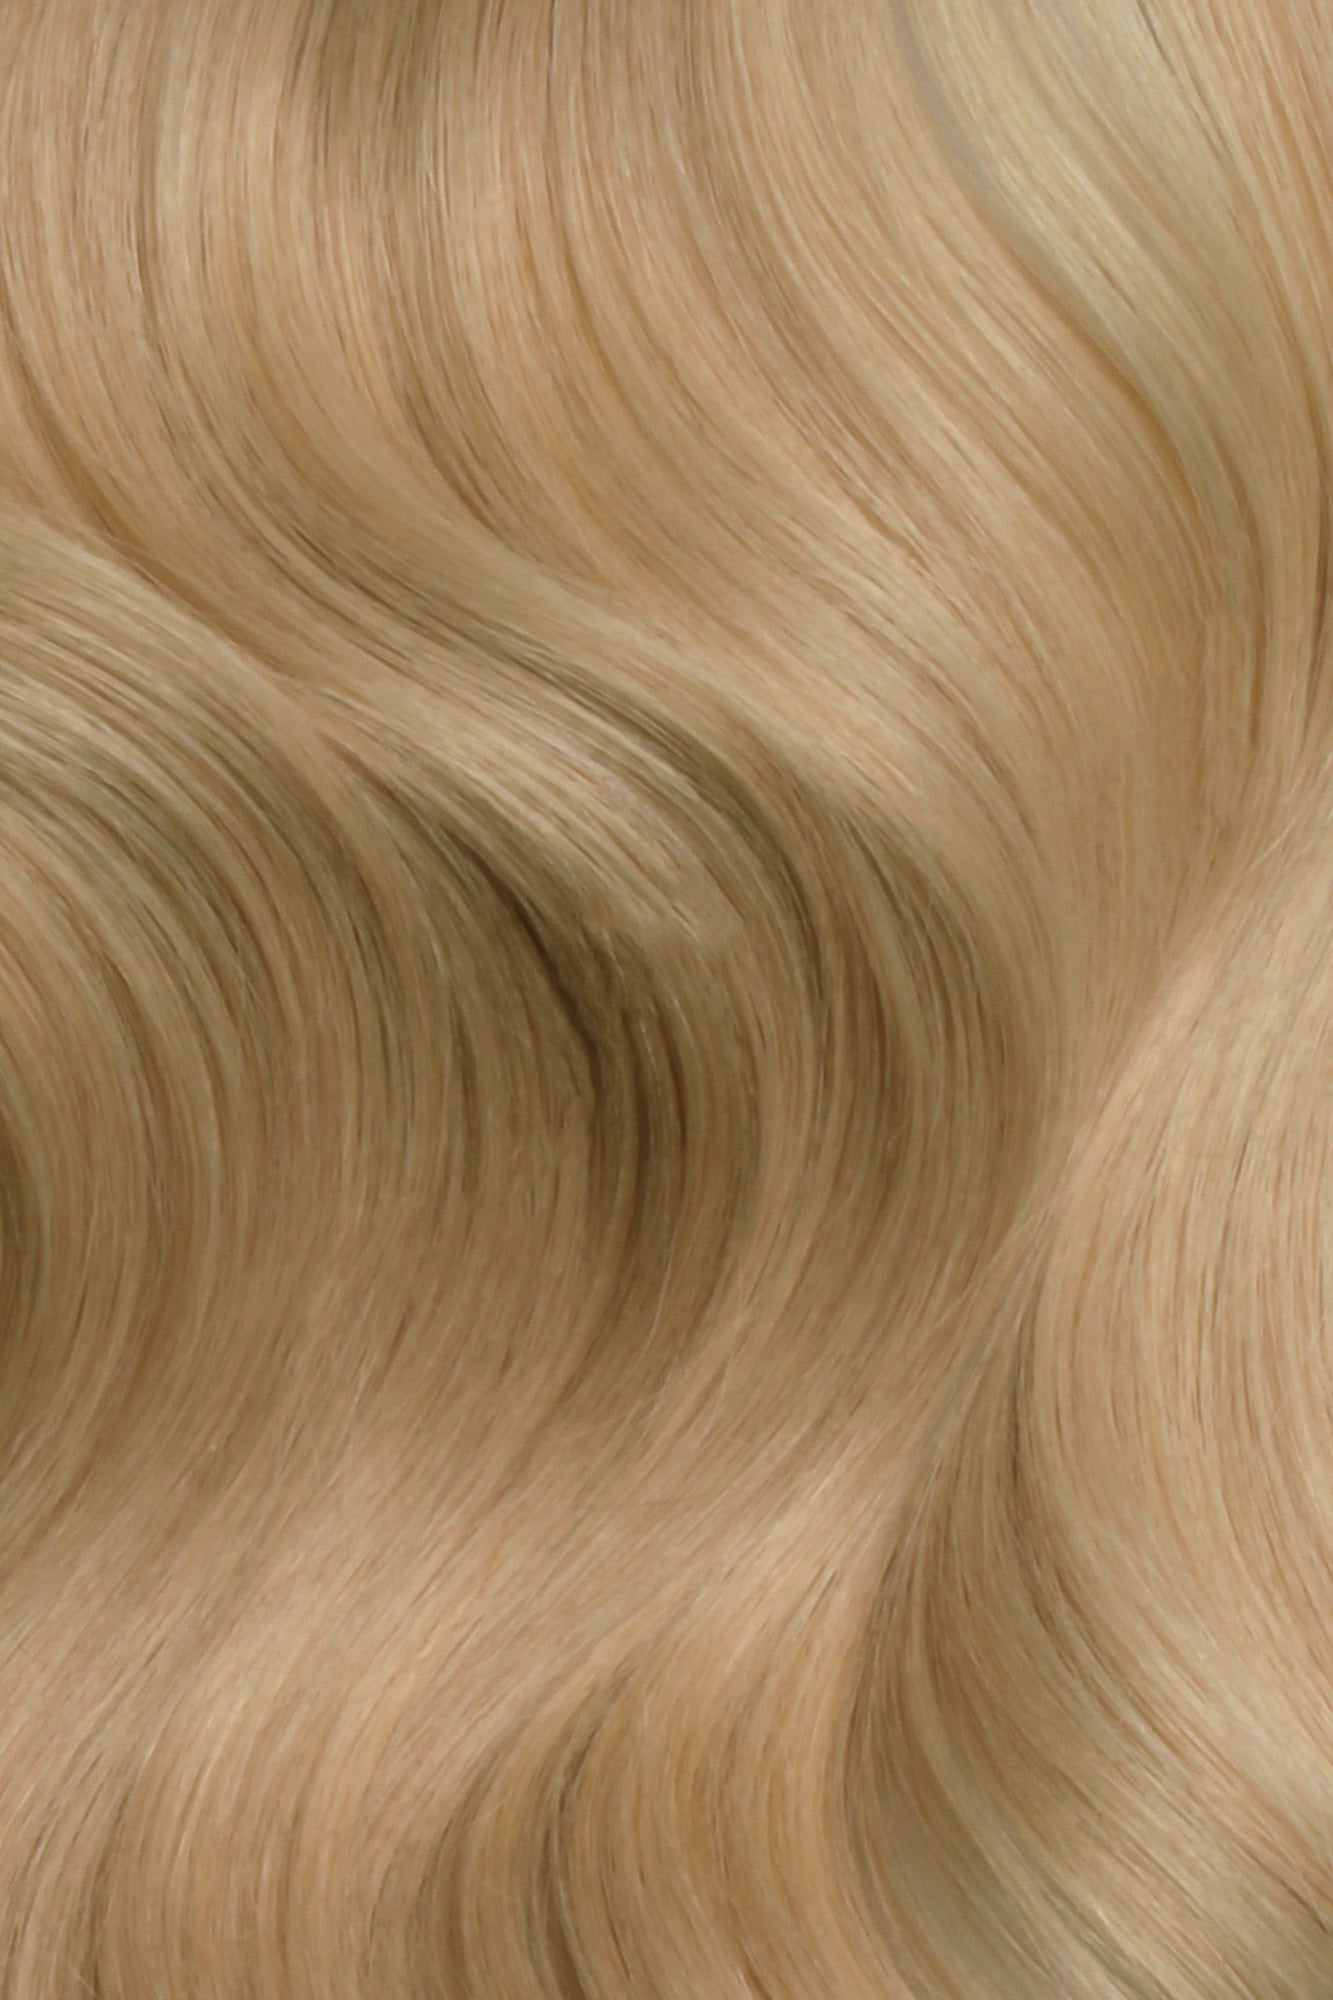 Nano Bonds 24 Inches - SWAY Hair Extensions Beach-Blonde-18-22 Ultra-fine, invisible bonds for a flawless, natural look. 100% Remy Human hair, lightweight and versatile. Reusable and perfect for individual or salon use.